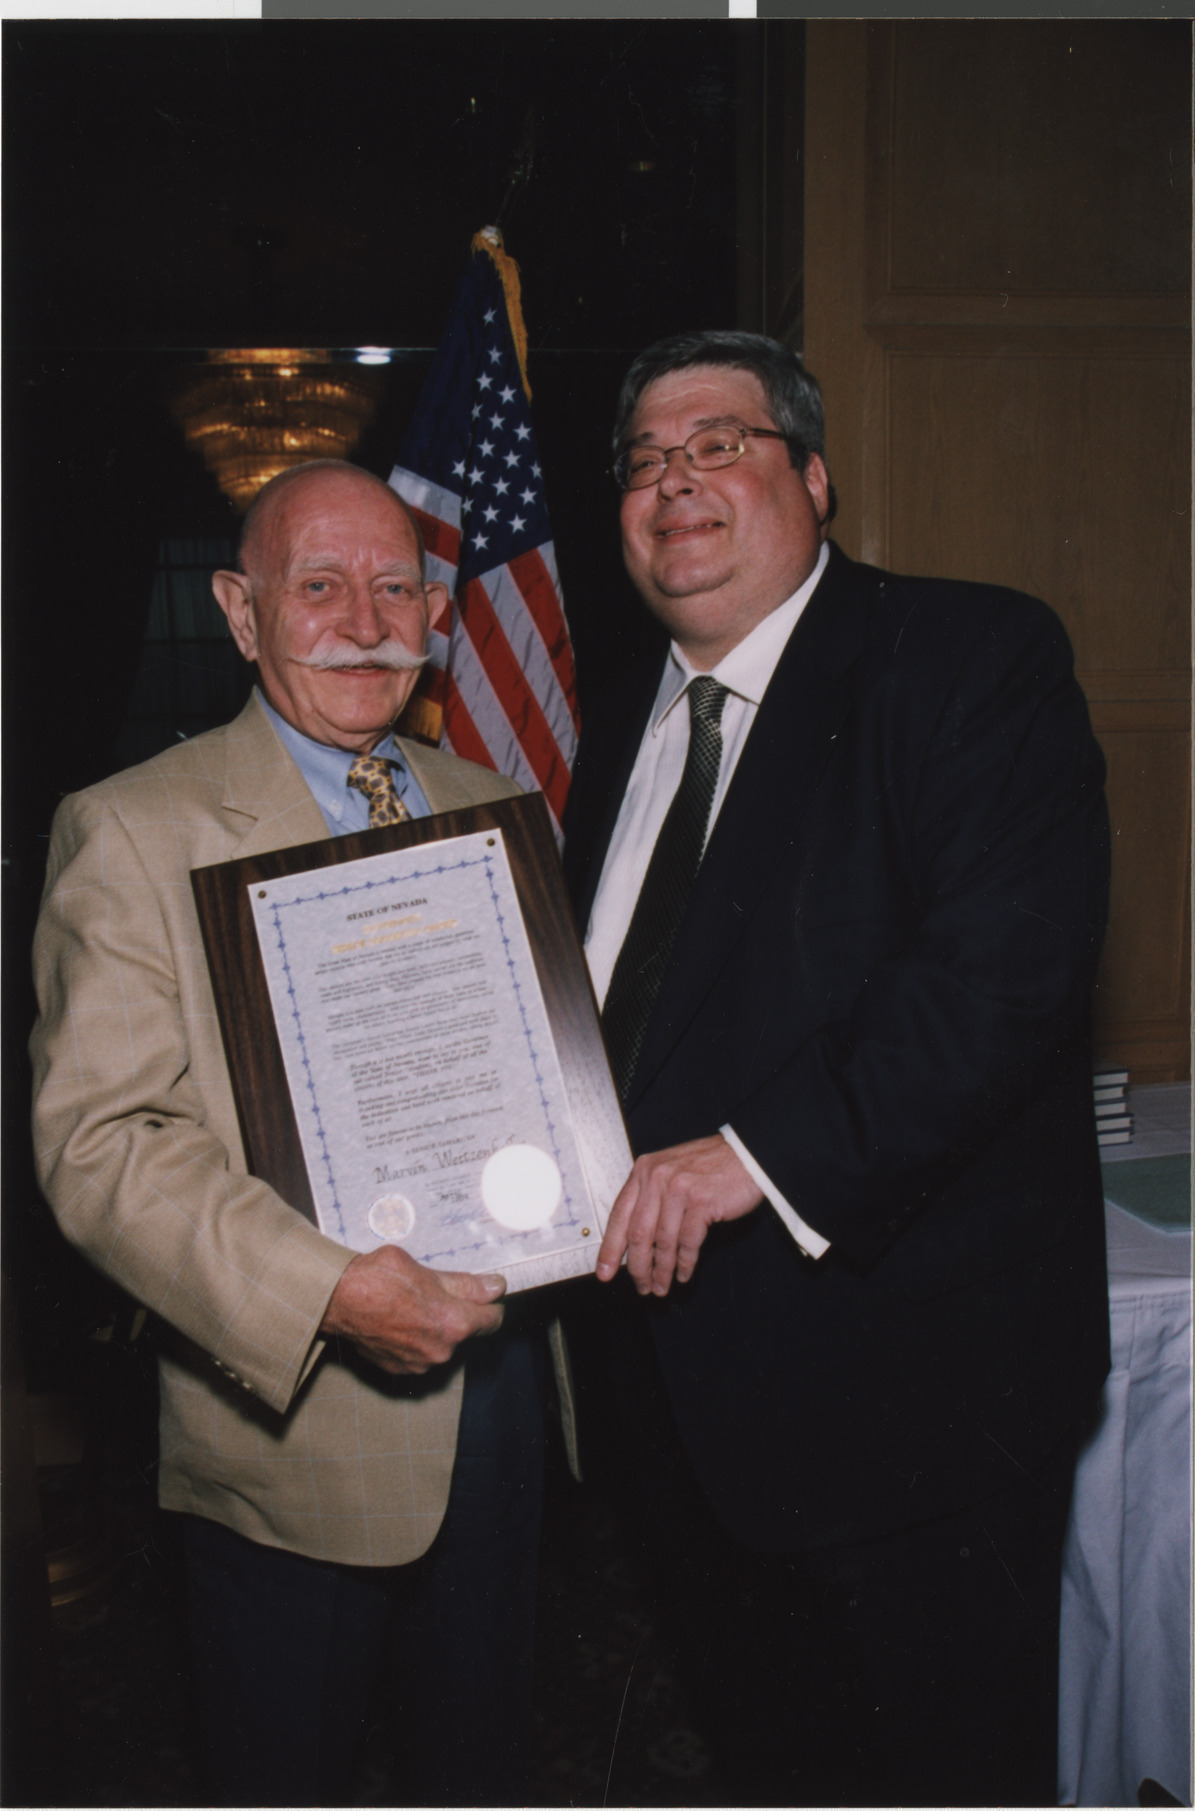 Photograph of United Jewish Community Annual Meeting at Canyon Gate Country Club, June 2, 2004